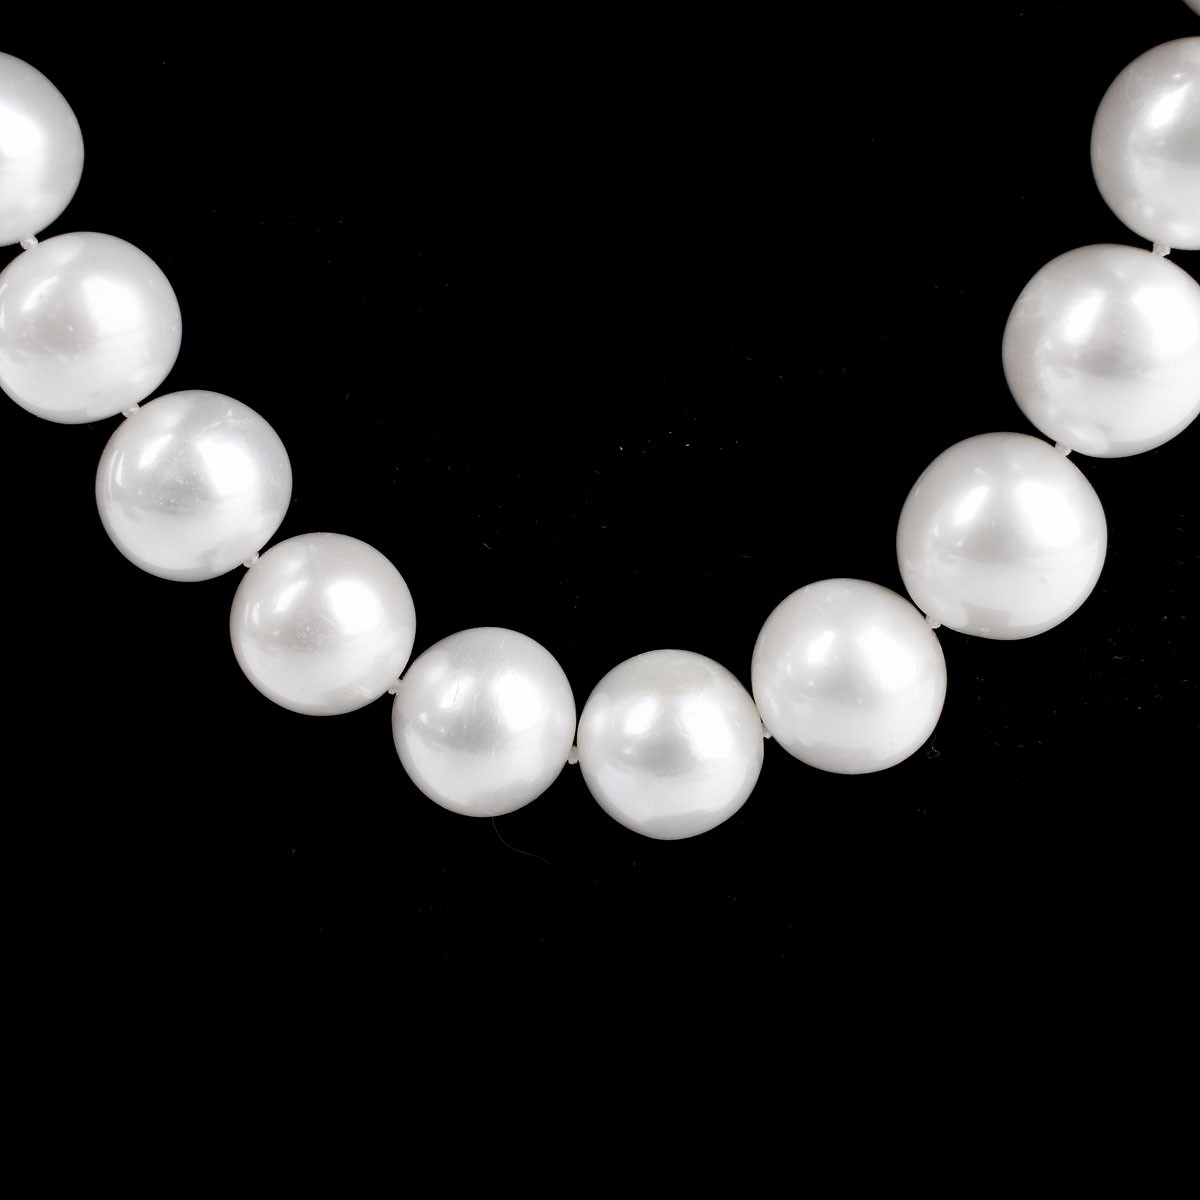 Single Strand 13.0-15.0mm South Sea White Pearl Necklace with 14 Karat Yellow Gold and Diamond Clasp. Clasp stamped 585.